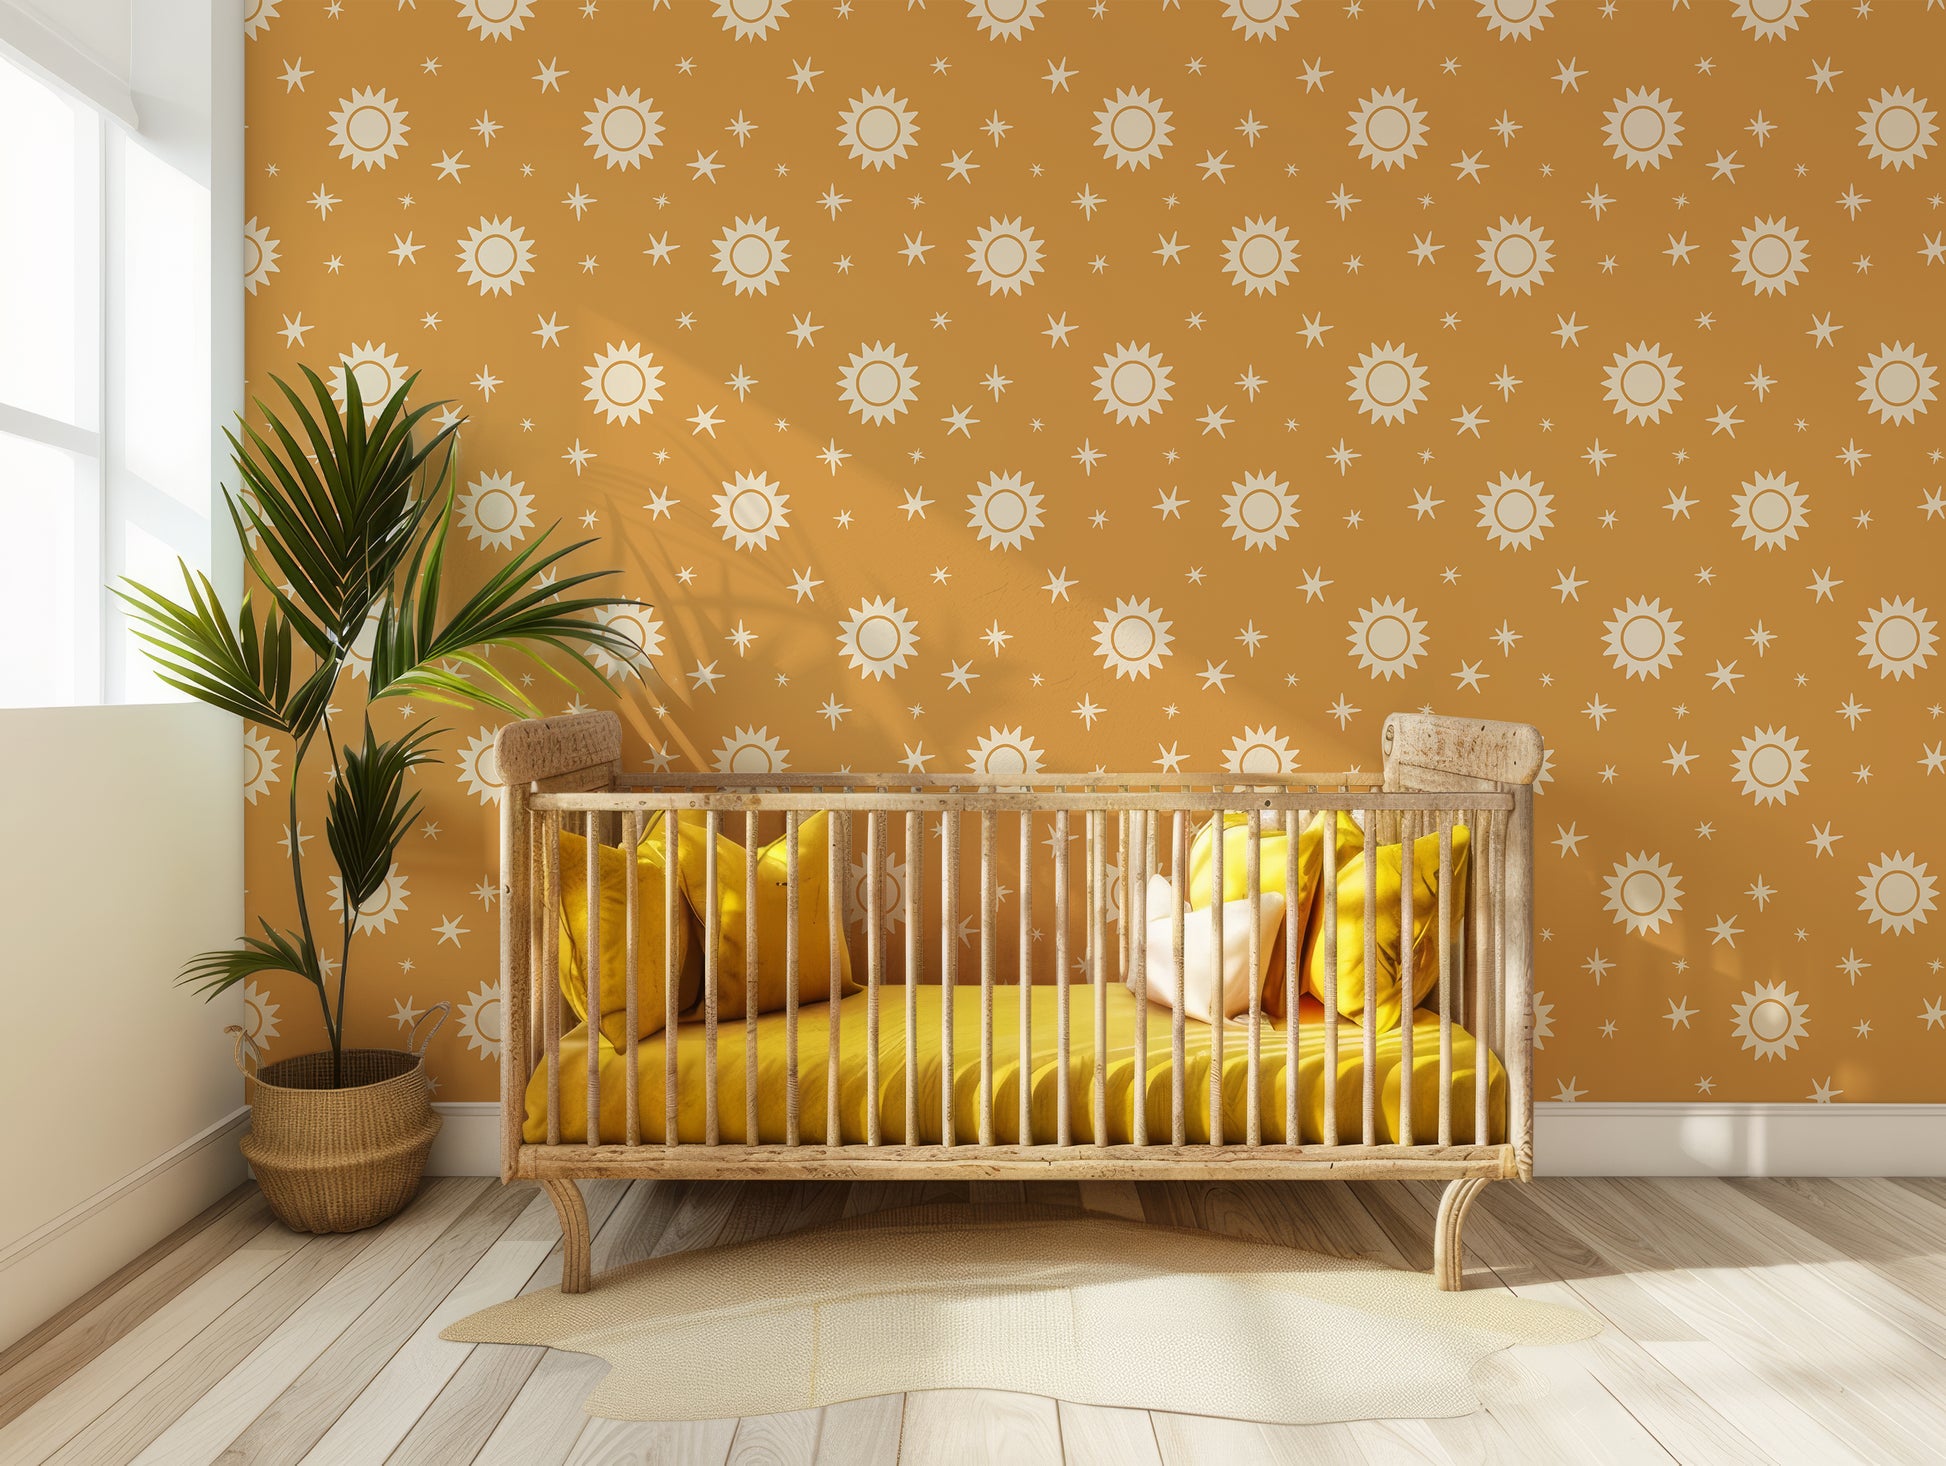 Starla Orange Sunslight And Stars Nursery Wallpaper In Nursery With Mustard Yellow Colored Crib And Large Green Plant Next To It